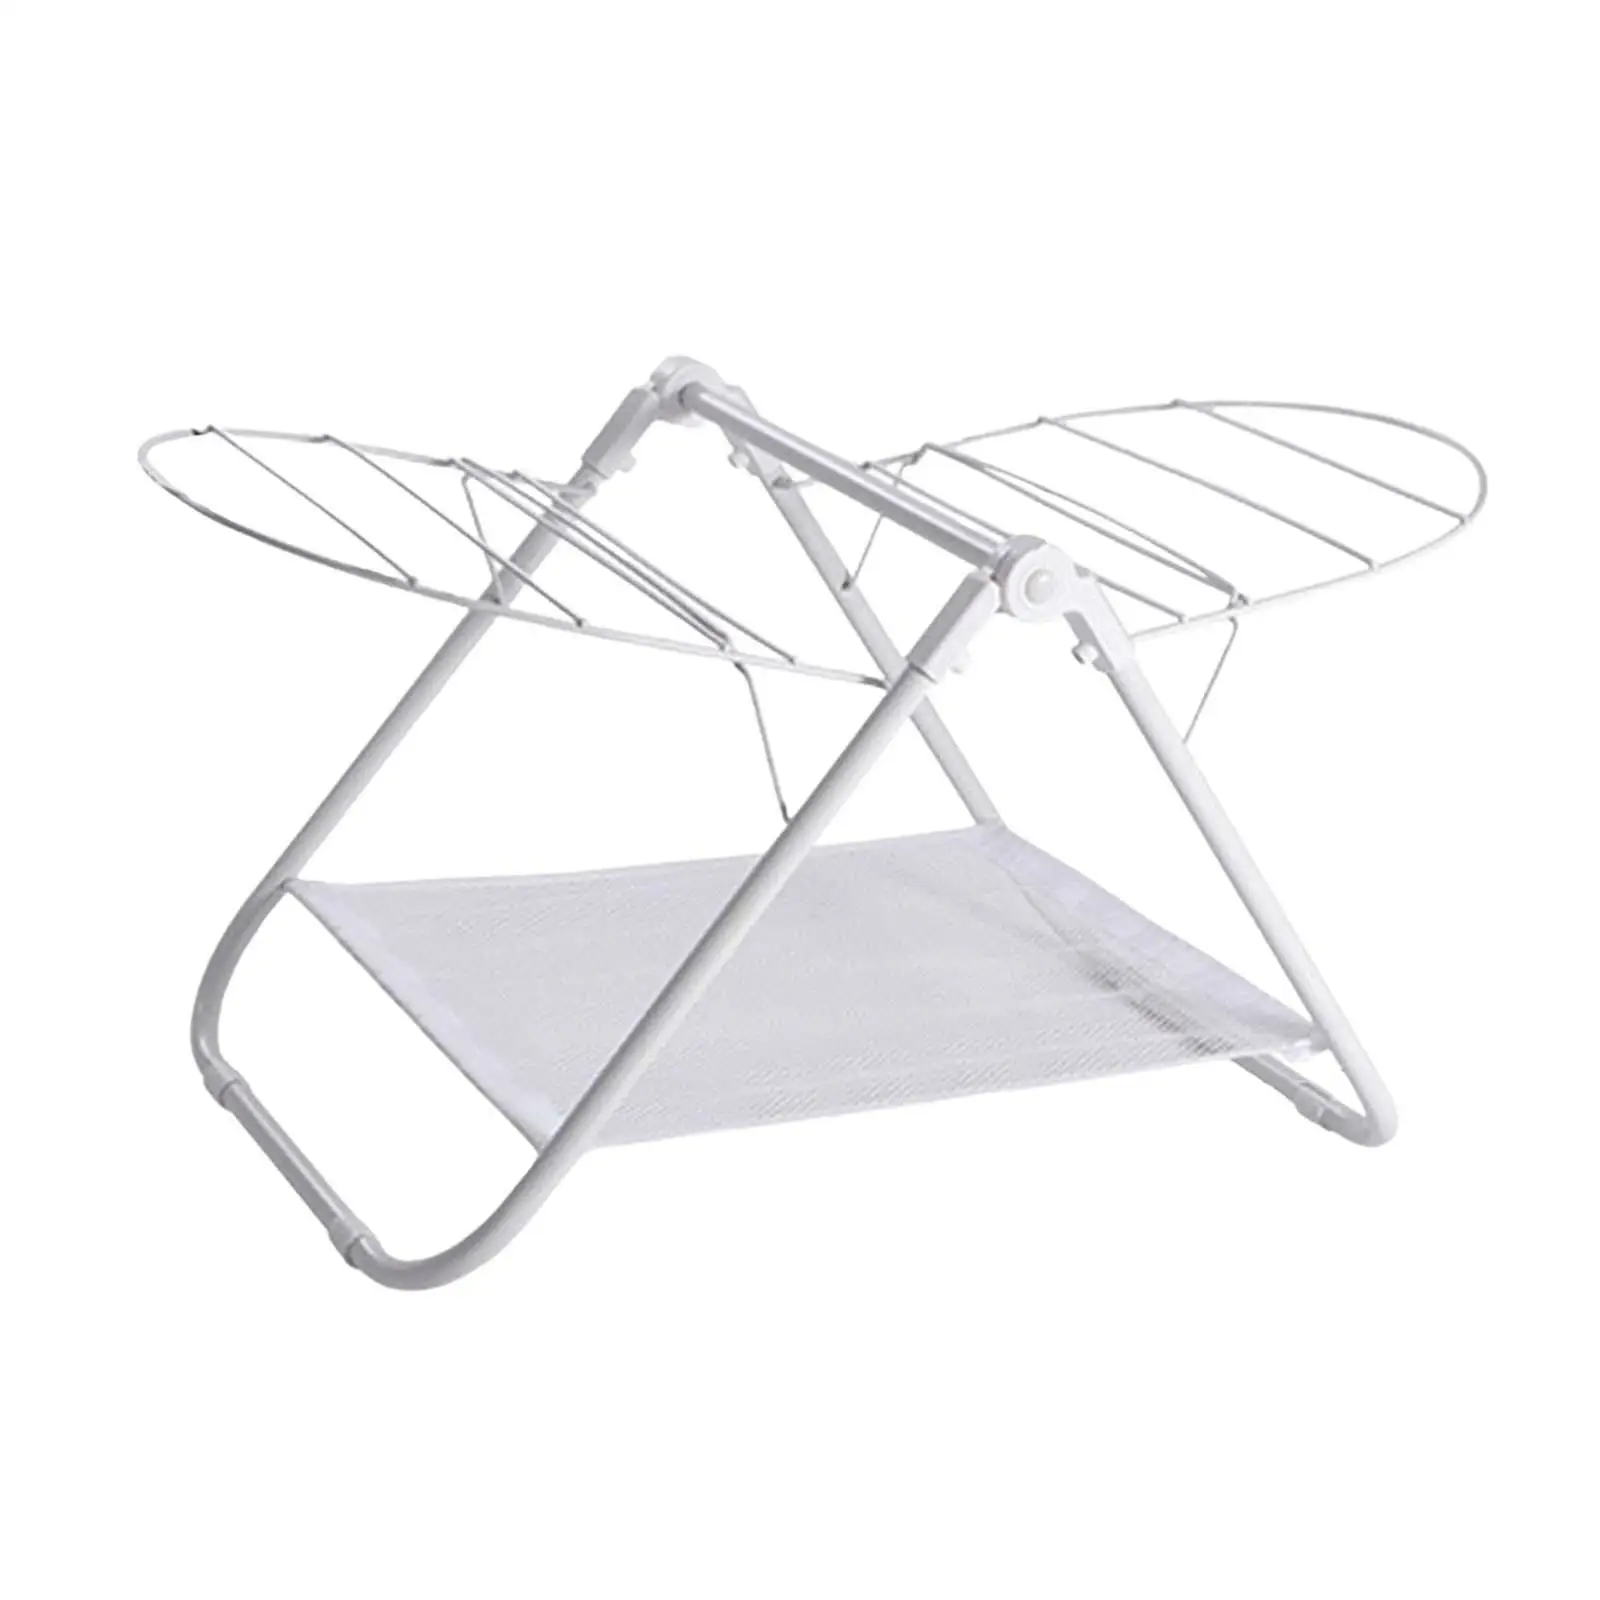 Collapsible Clothes Drying Rack Stainless Steel Durable Large Gullwing Drying Rack for Pillow Linens Towel Quilt Indoor Outdoor